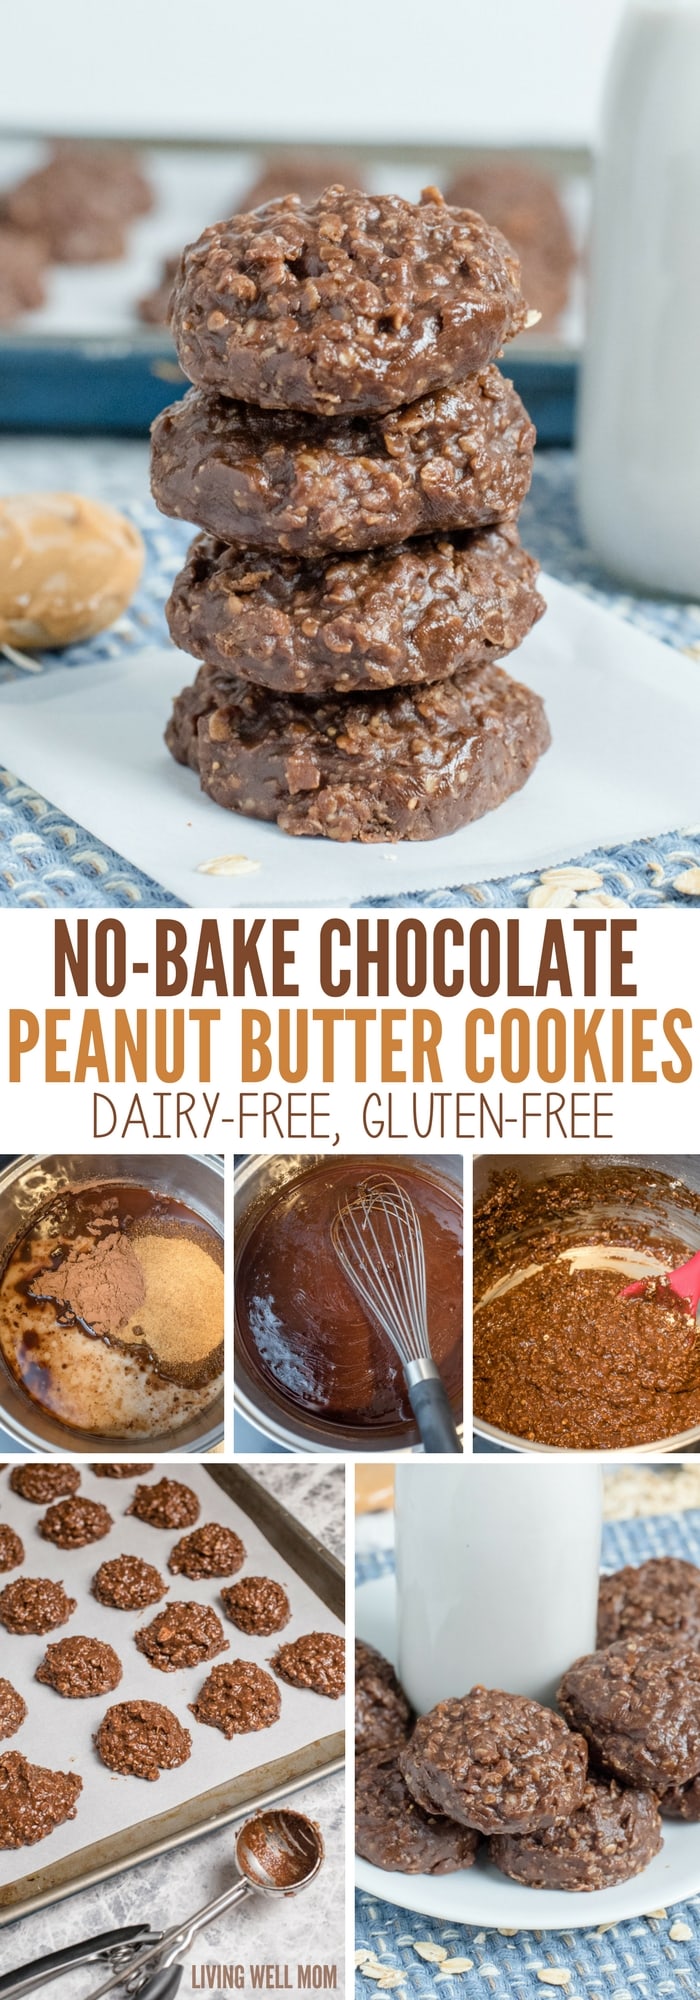 Dairy-Free No-Bake Chocolate Peanut Butter Cookies